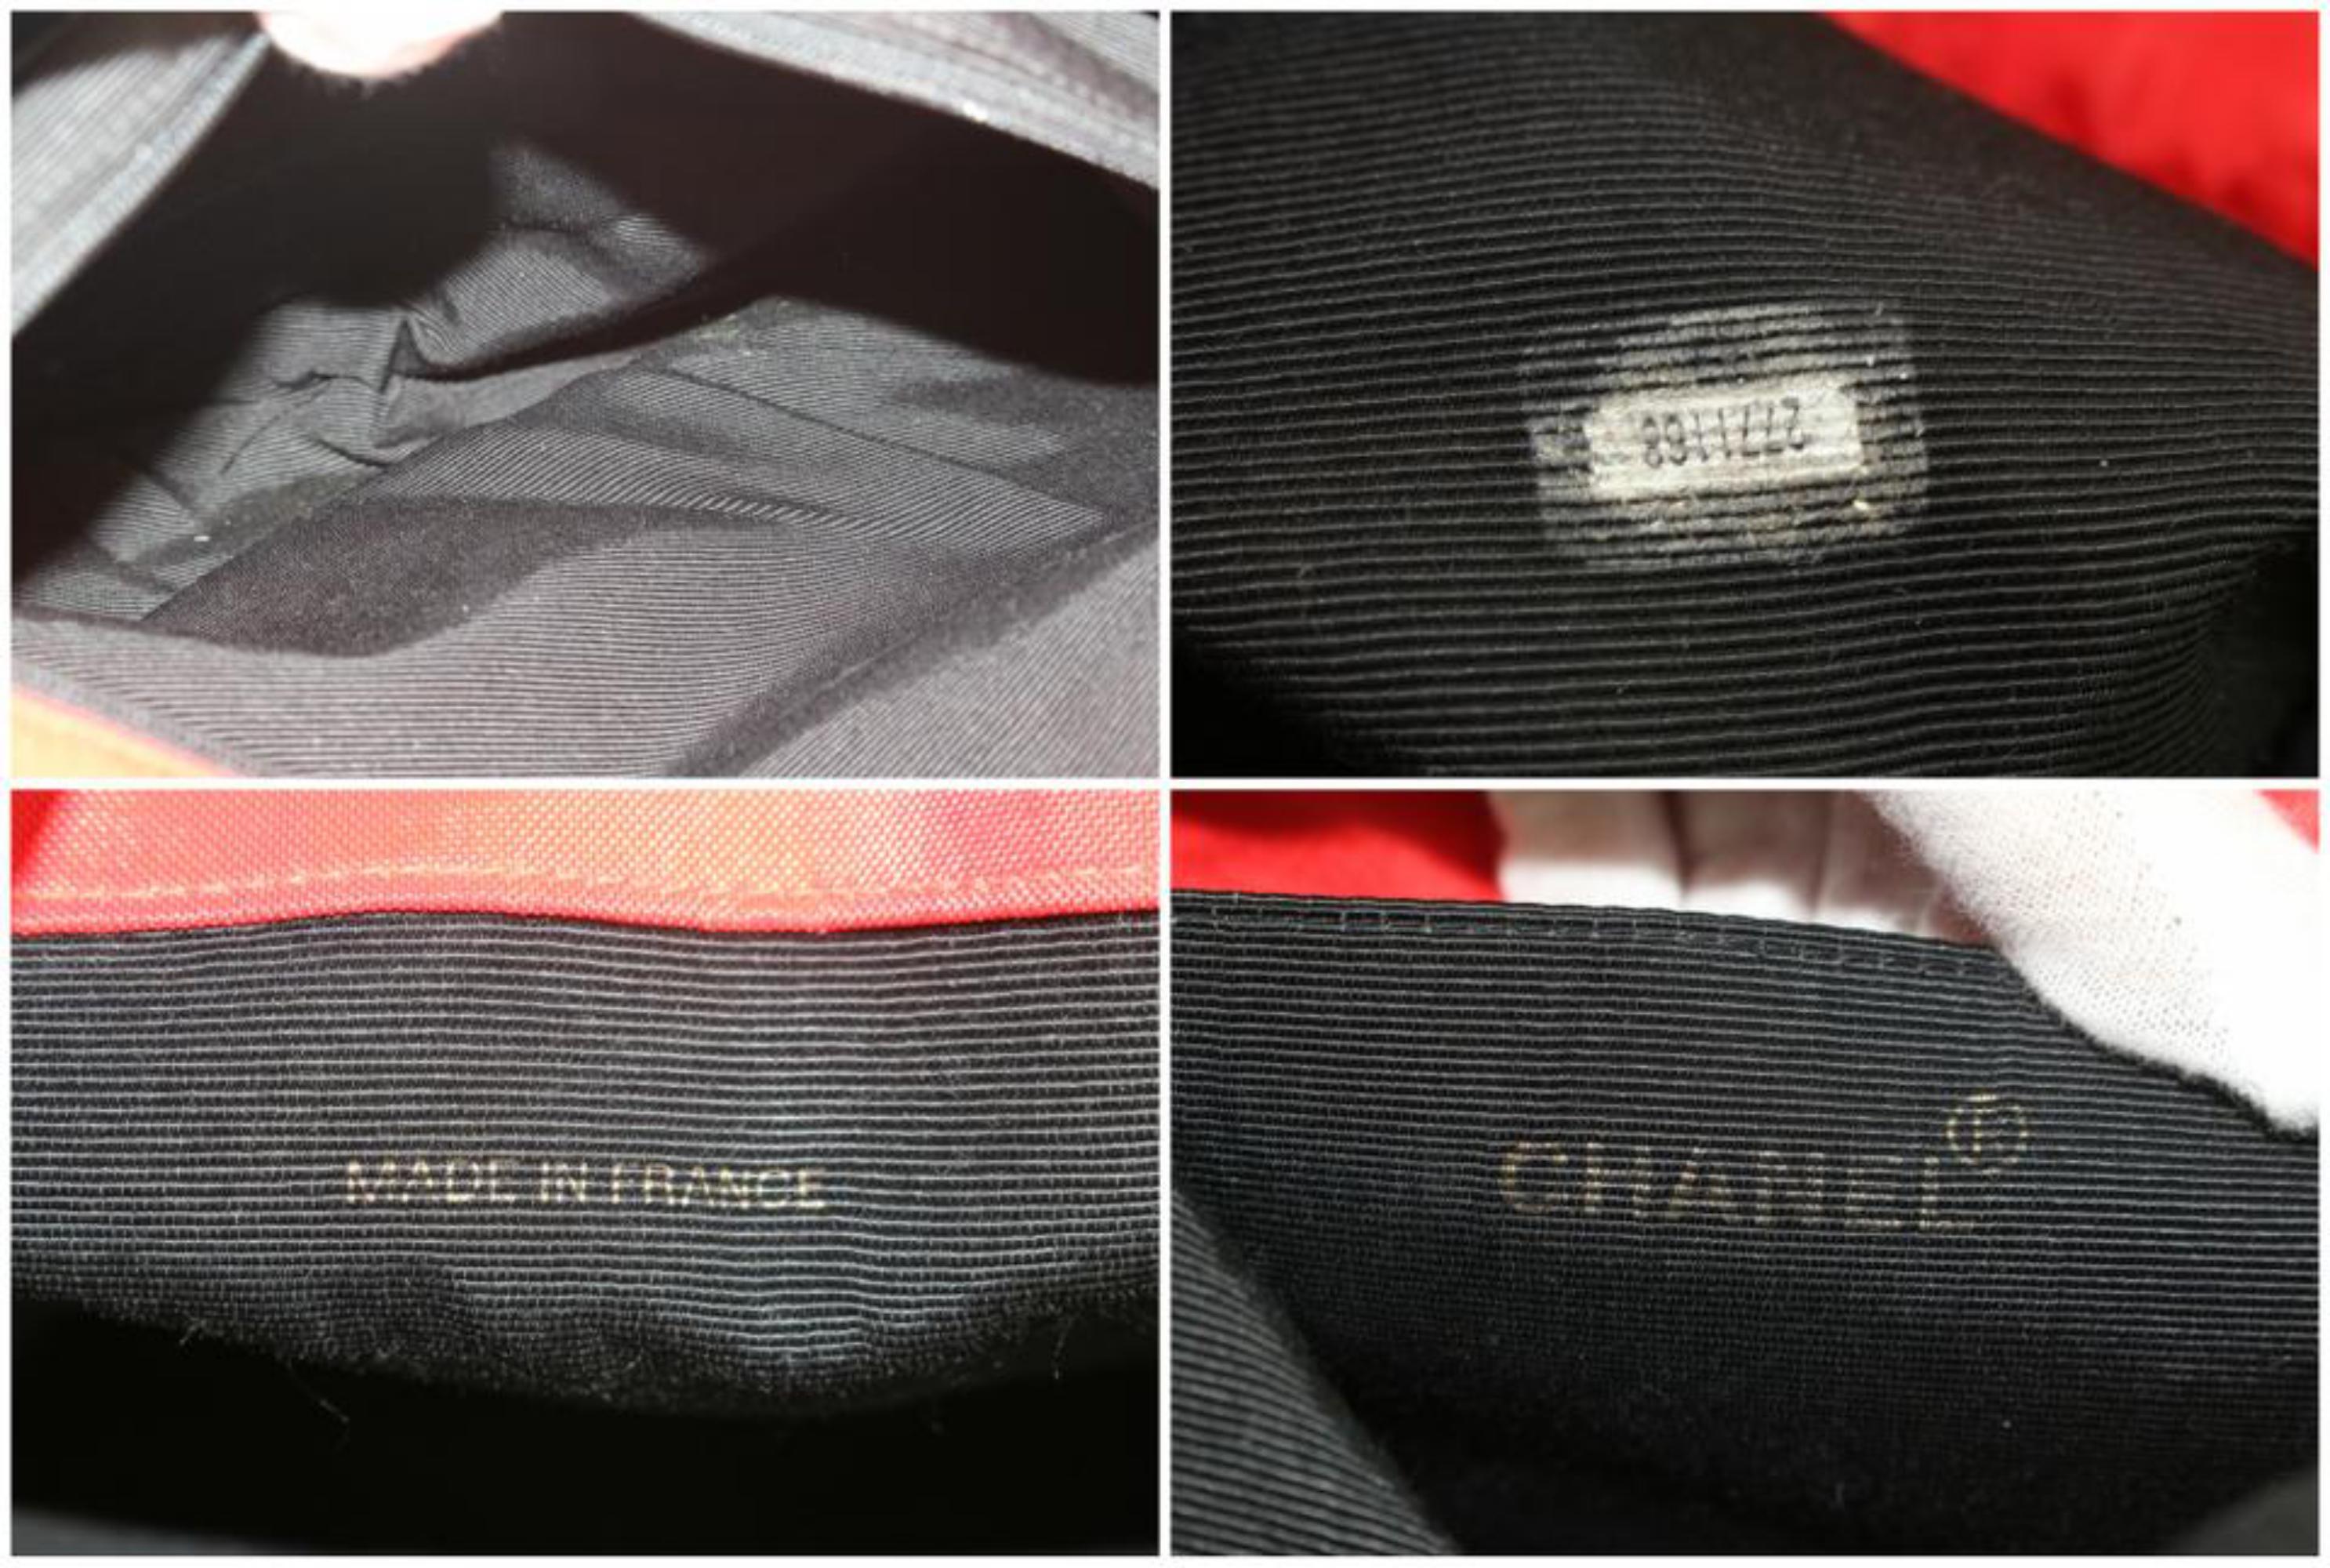 Chanel Large Bicolor Cc Logo Chain 20cz1106 Red Nylon Tote In Good Condition For Sale In Forest Hills, NY